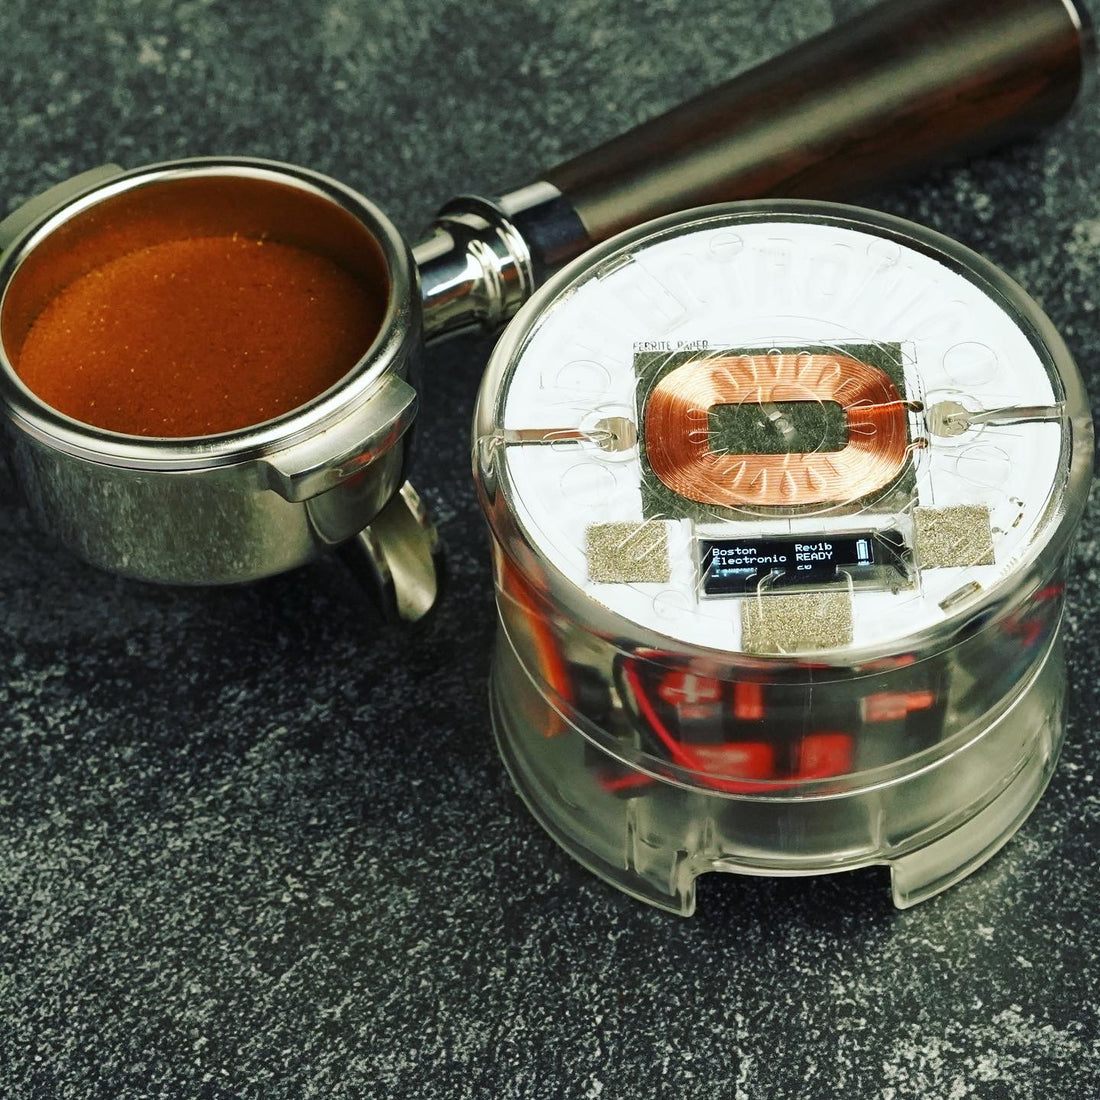 How to Choose the Right Espresso Tamper for Your Needs